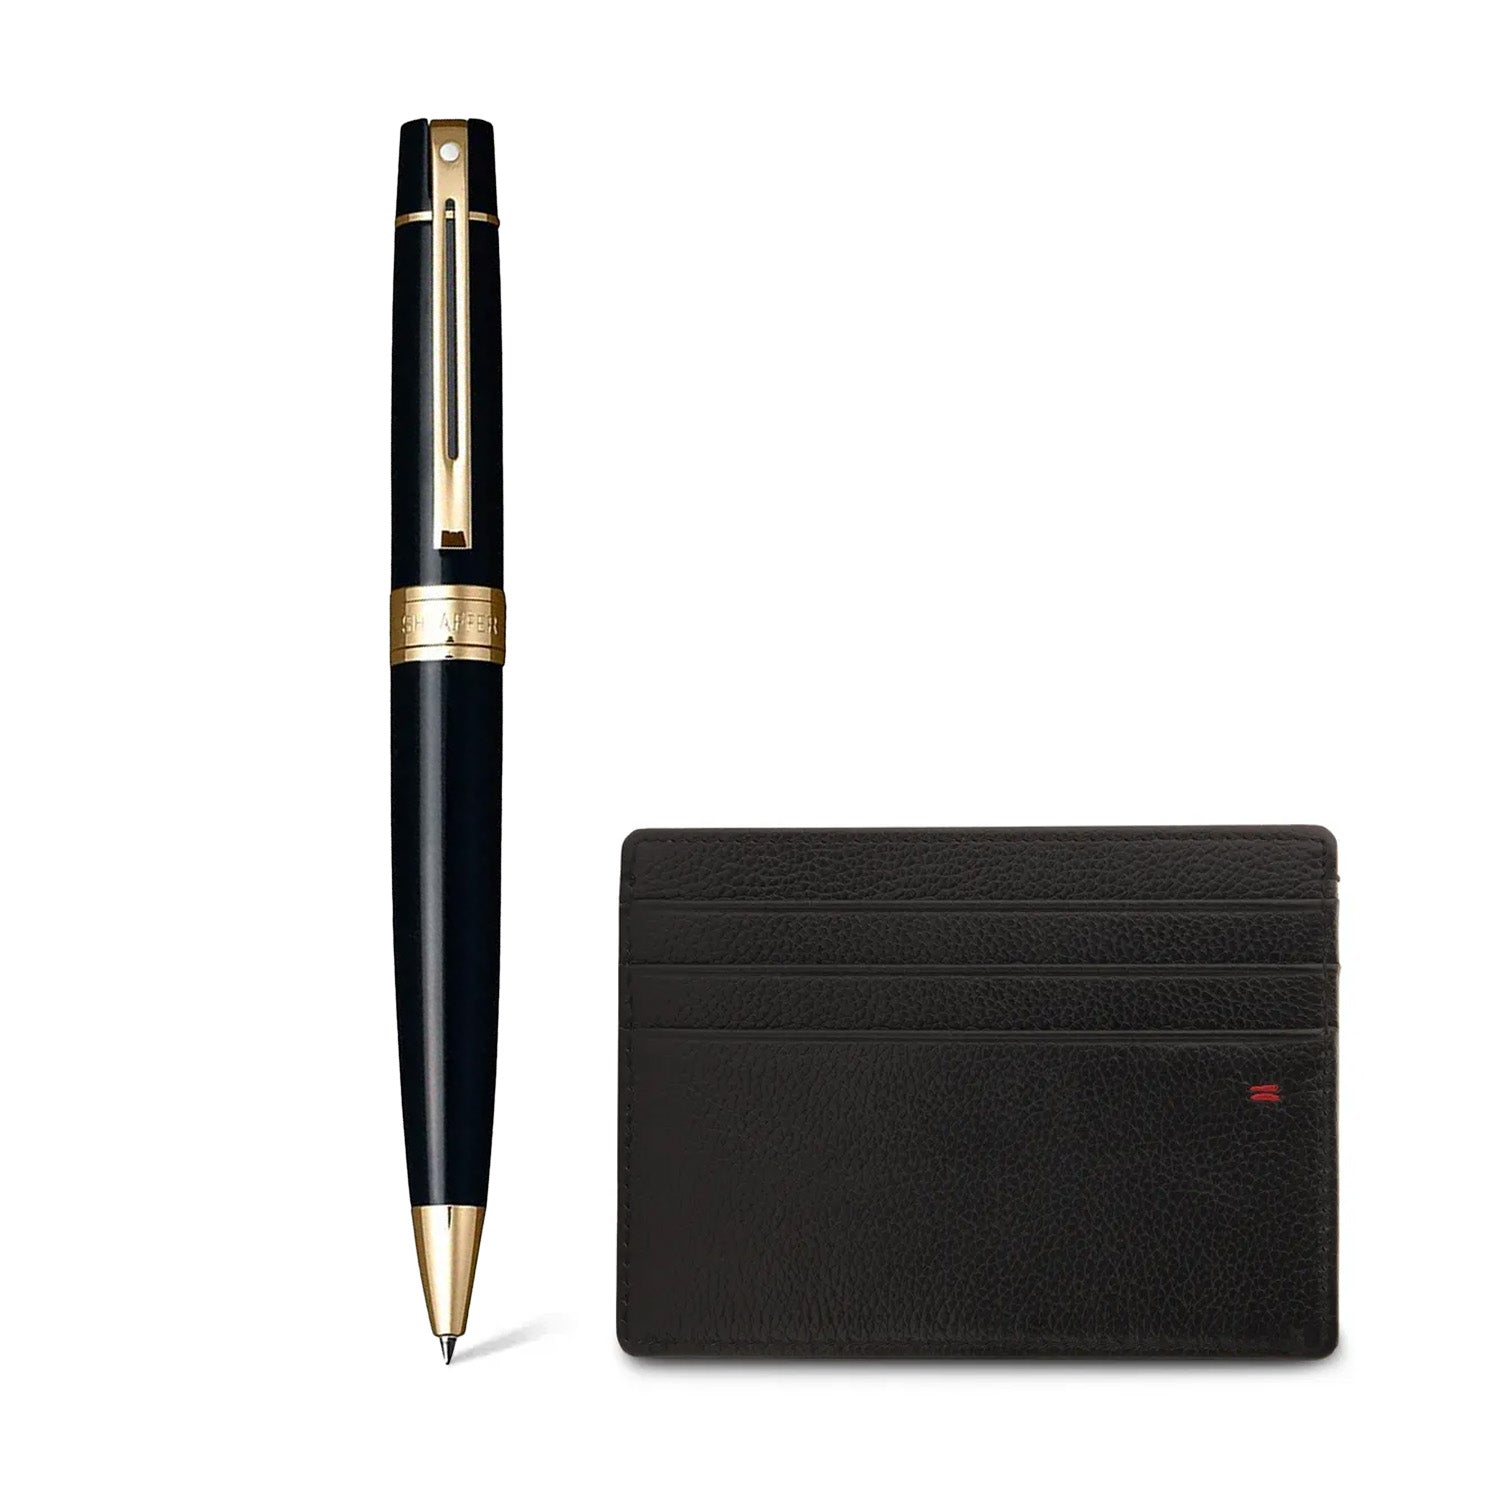 Sheaffer Gift Set ft. Glossy Black 300 Ballpoint Pen with Gold Trims and Credit Card Holder